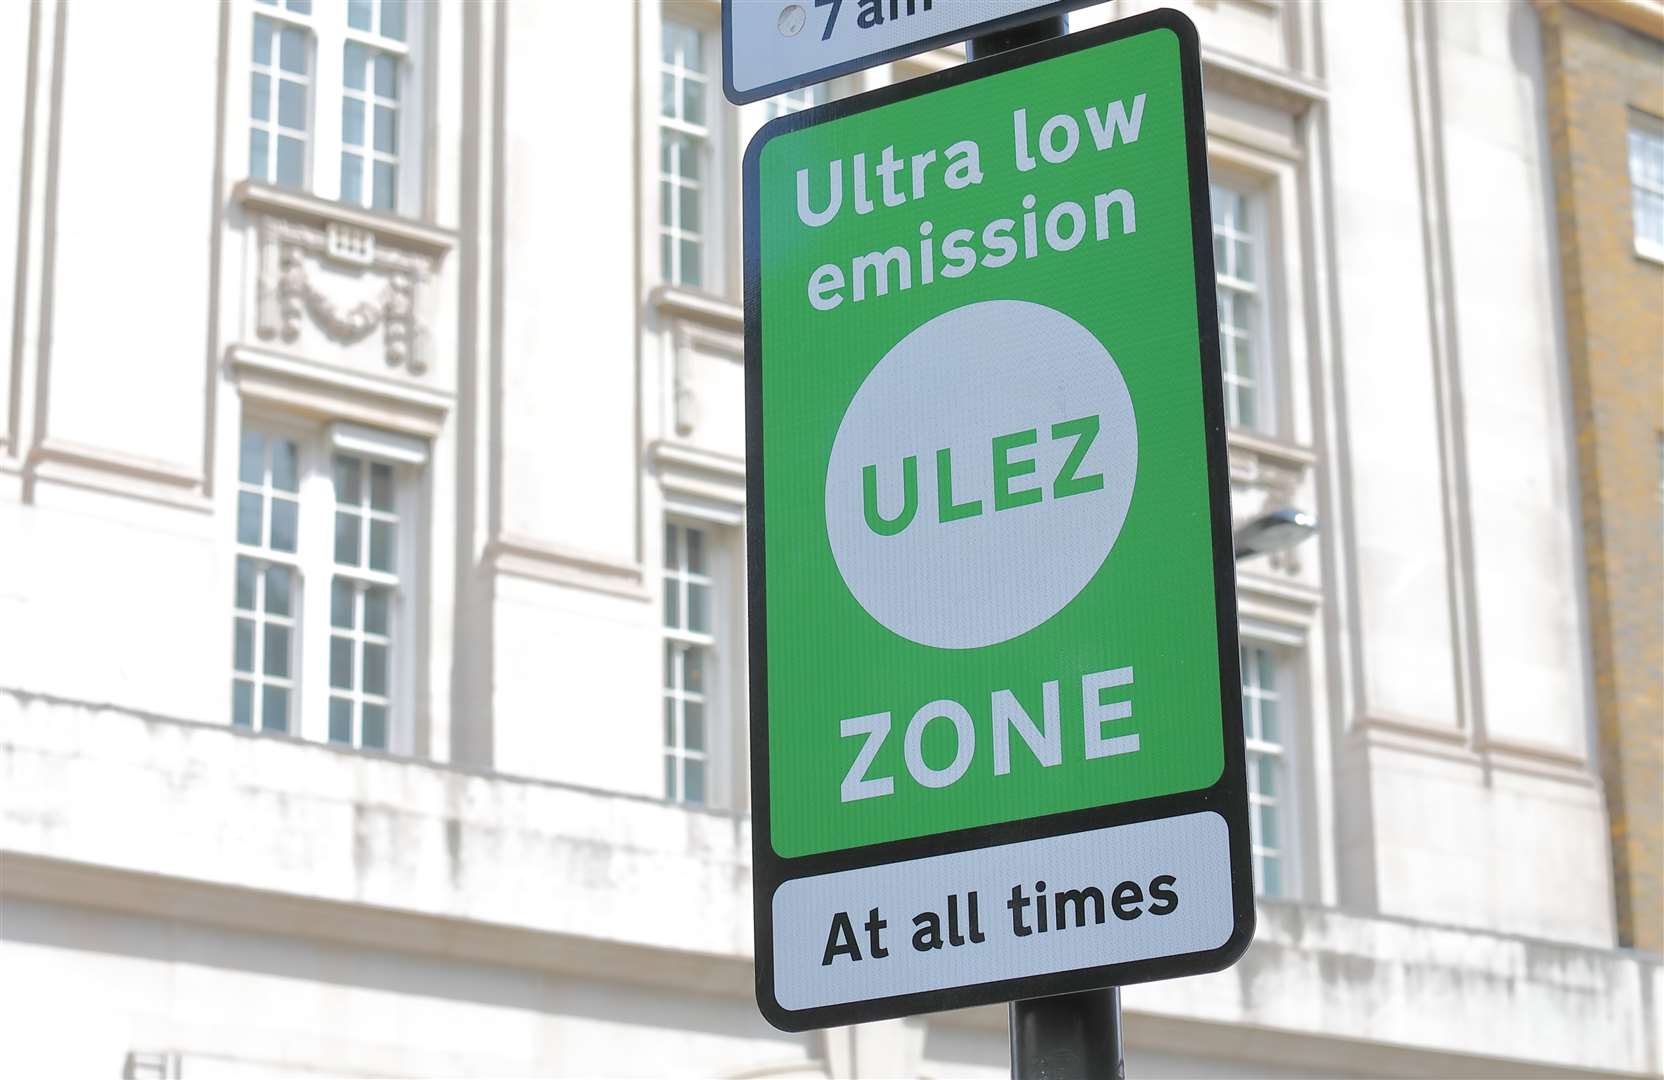 The London ULEZ Zone is set to expand.